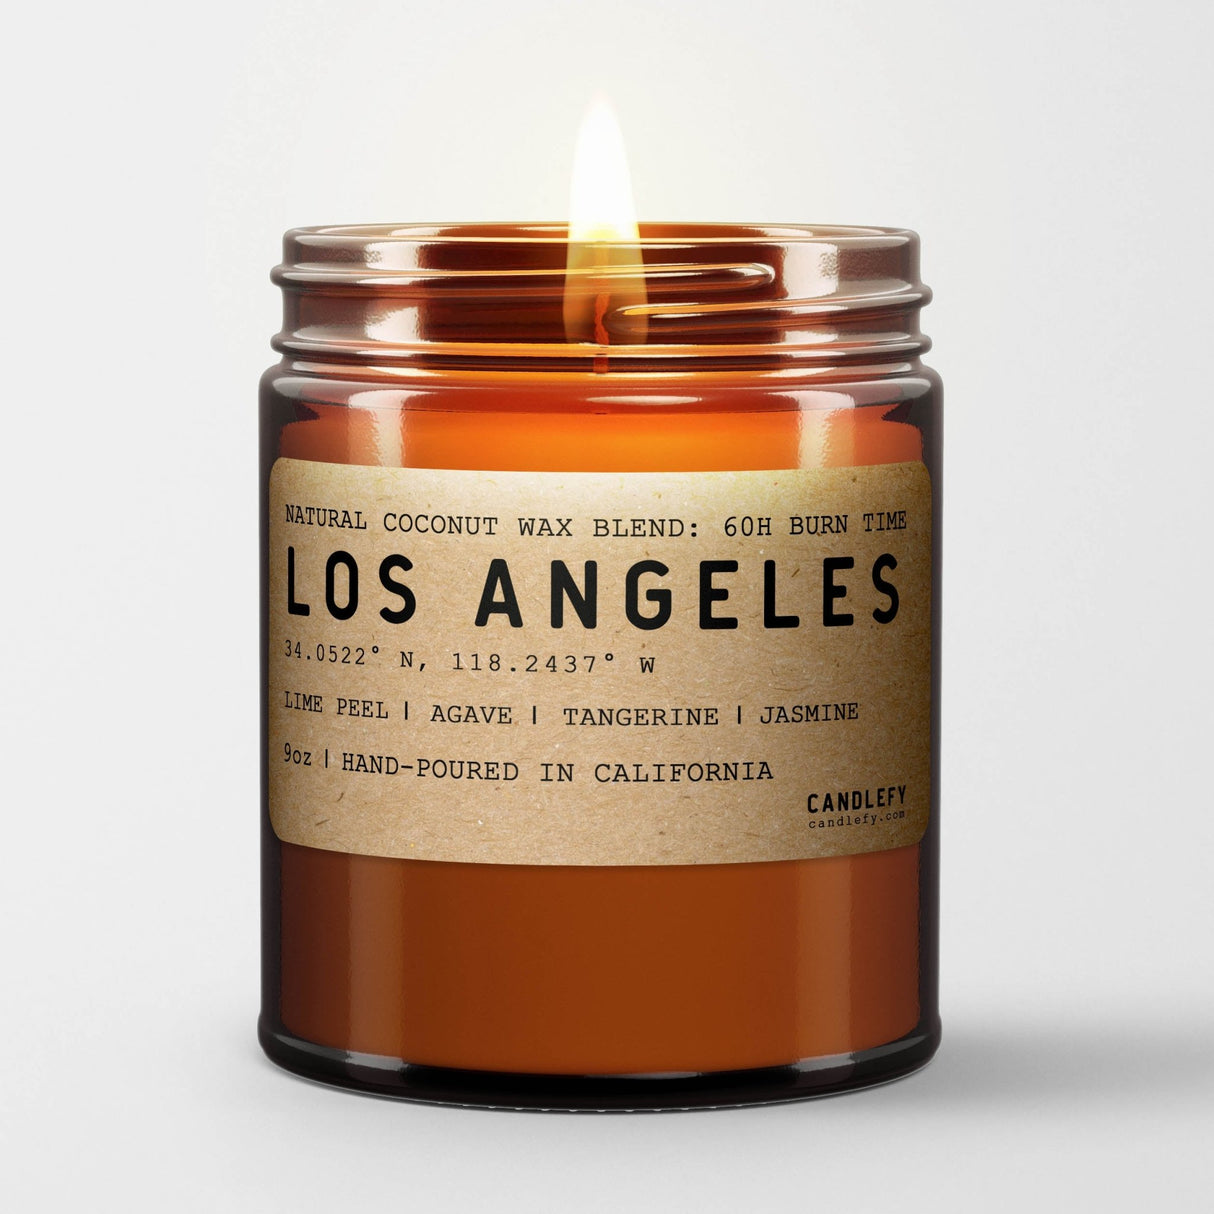 Los Angeles: California Scented Candle (Lime Peel, Agave, Jasmine) - Candlefy